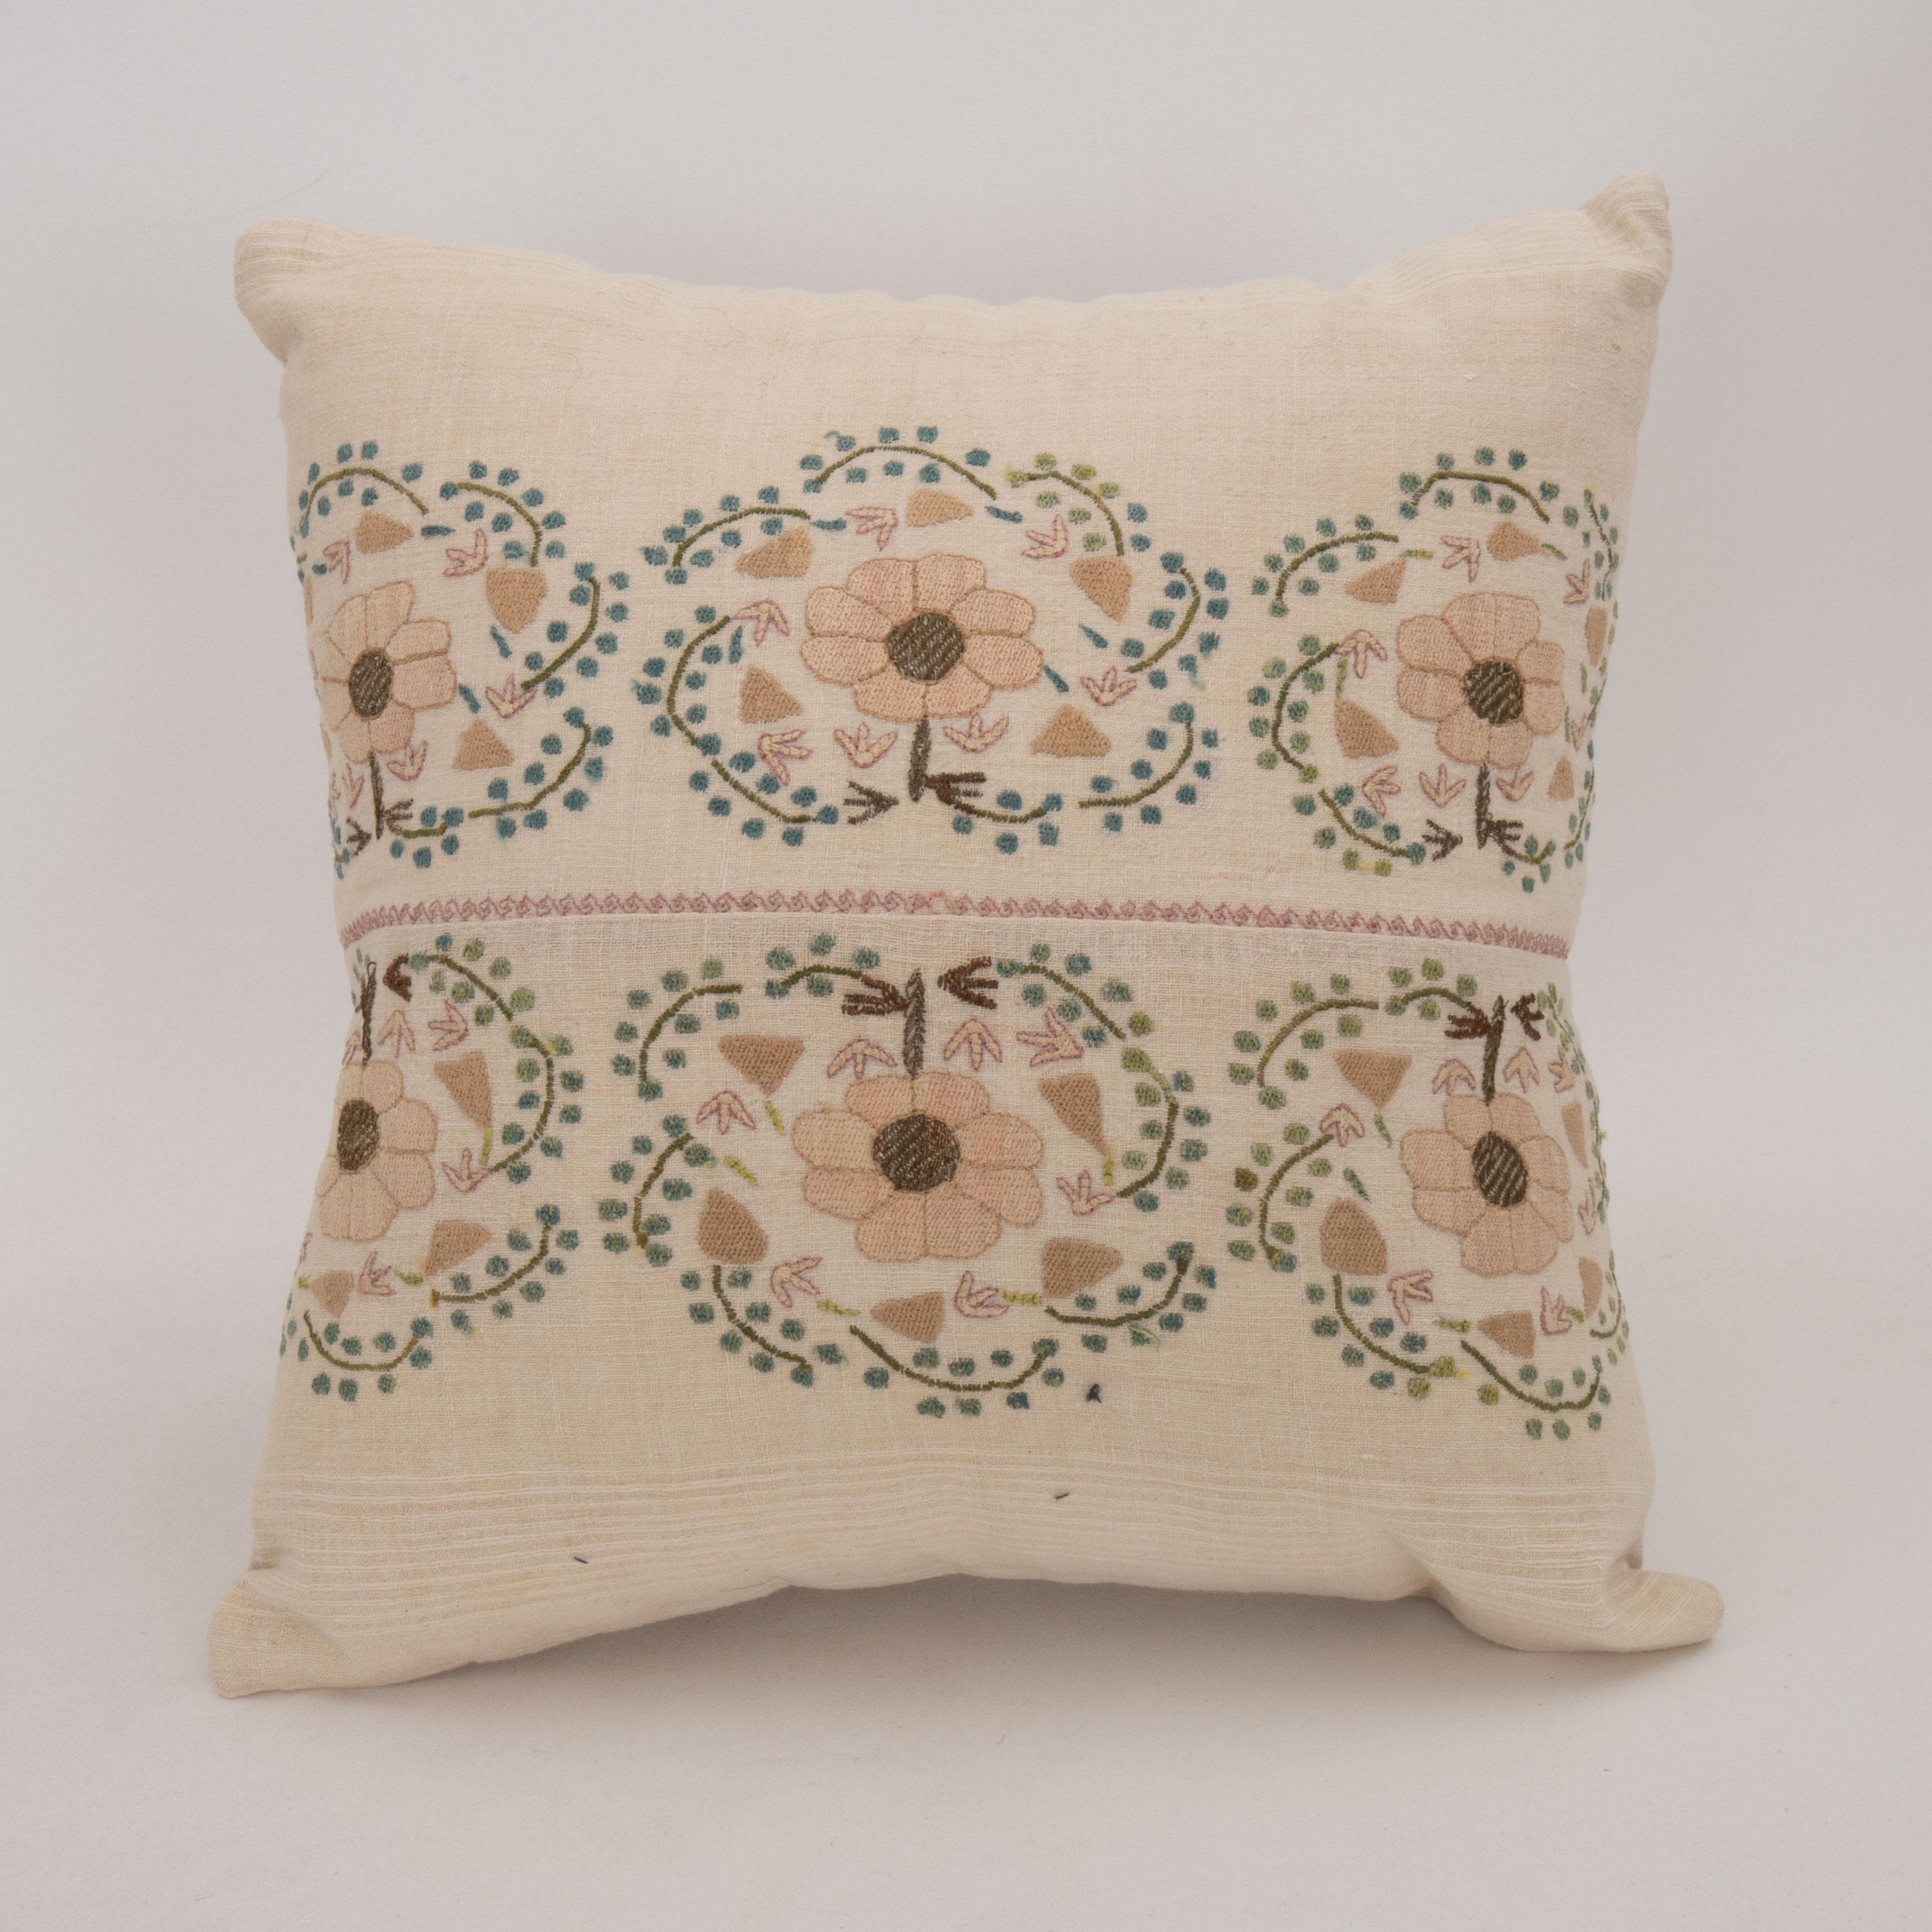 Suzani Pillow Case Made from an Antique Ottoman Embroidery